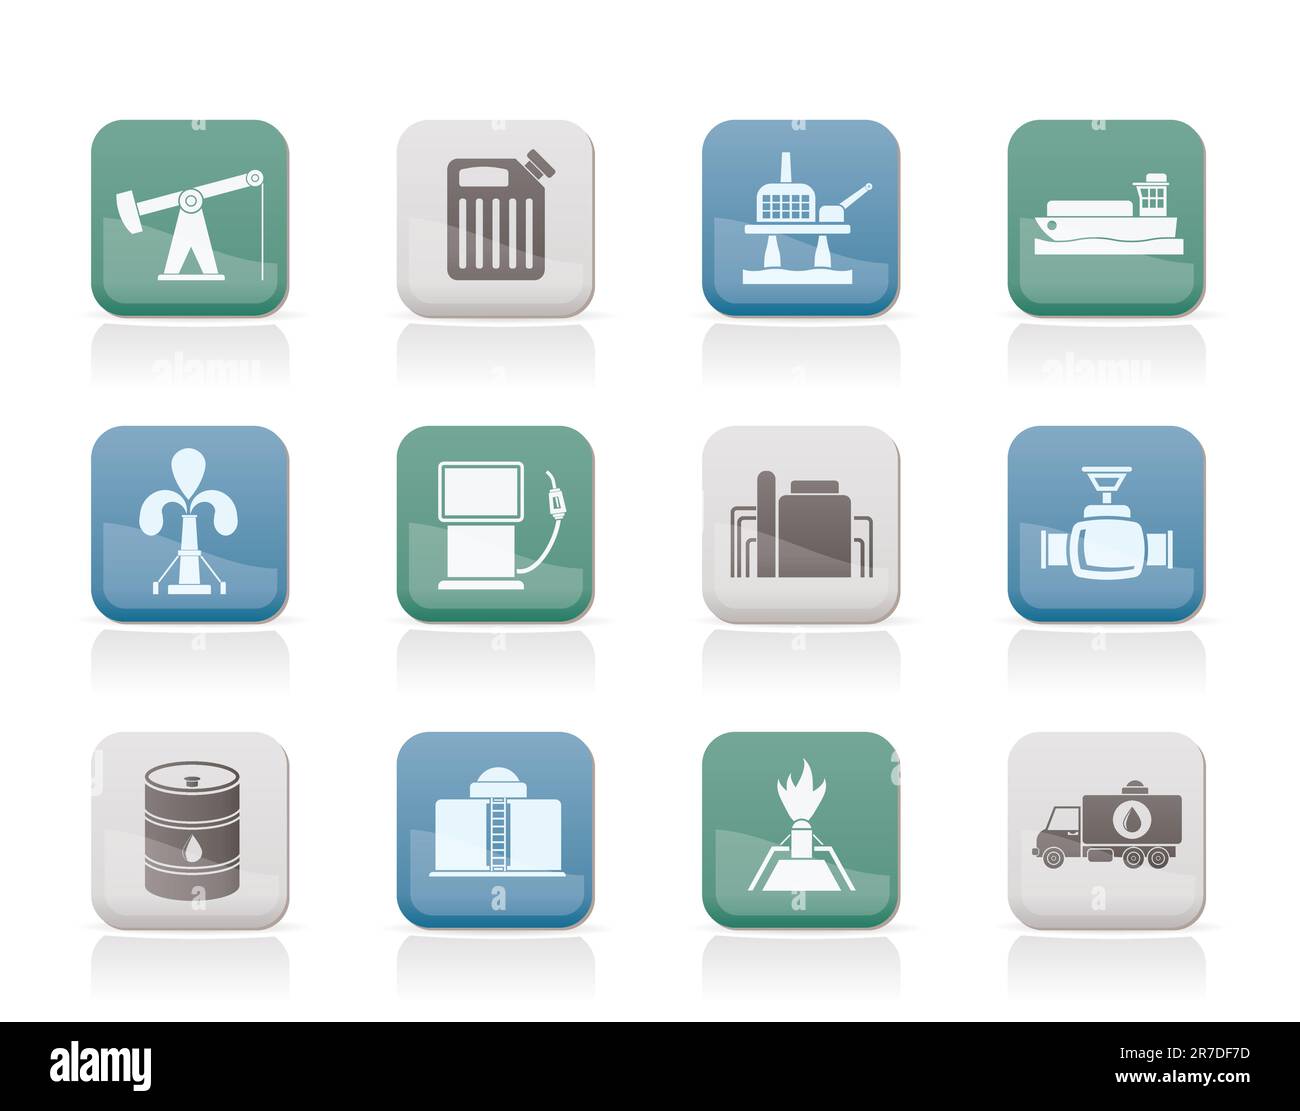 Oil and petrol industry icons - vector icon set Stock Vector